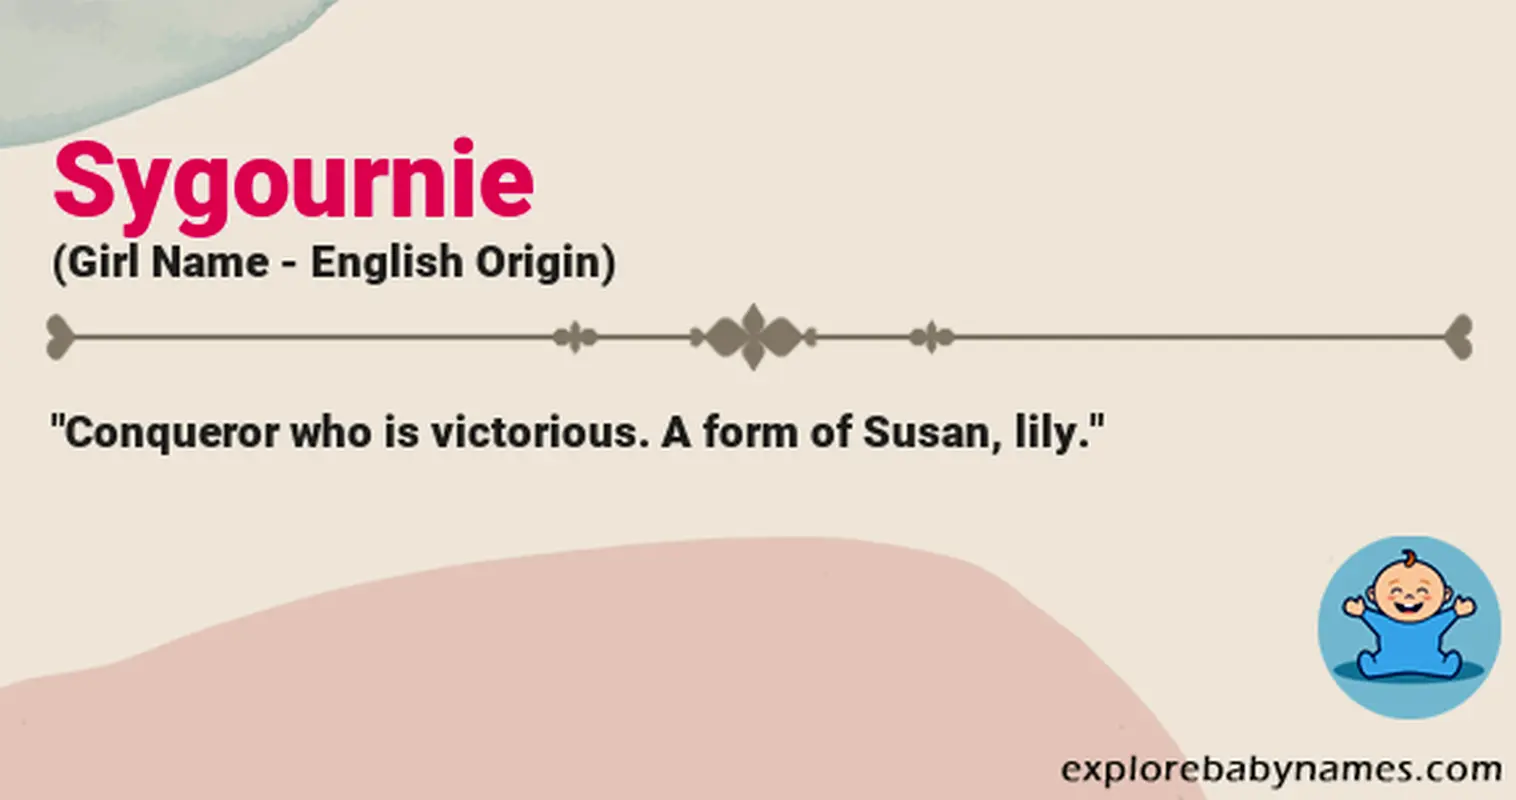 Meaning of Sygournie